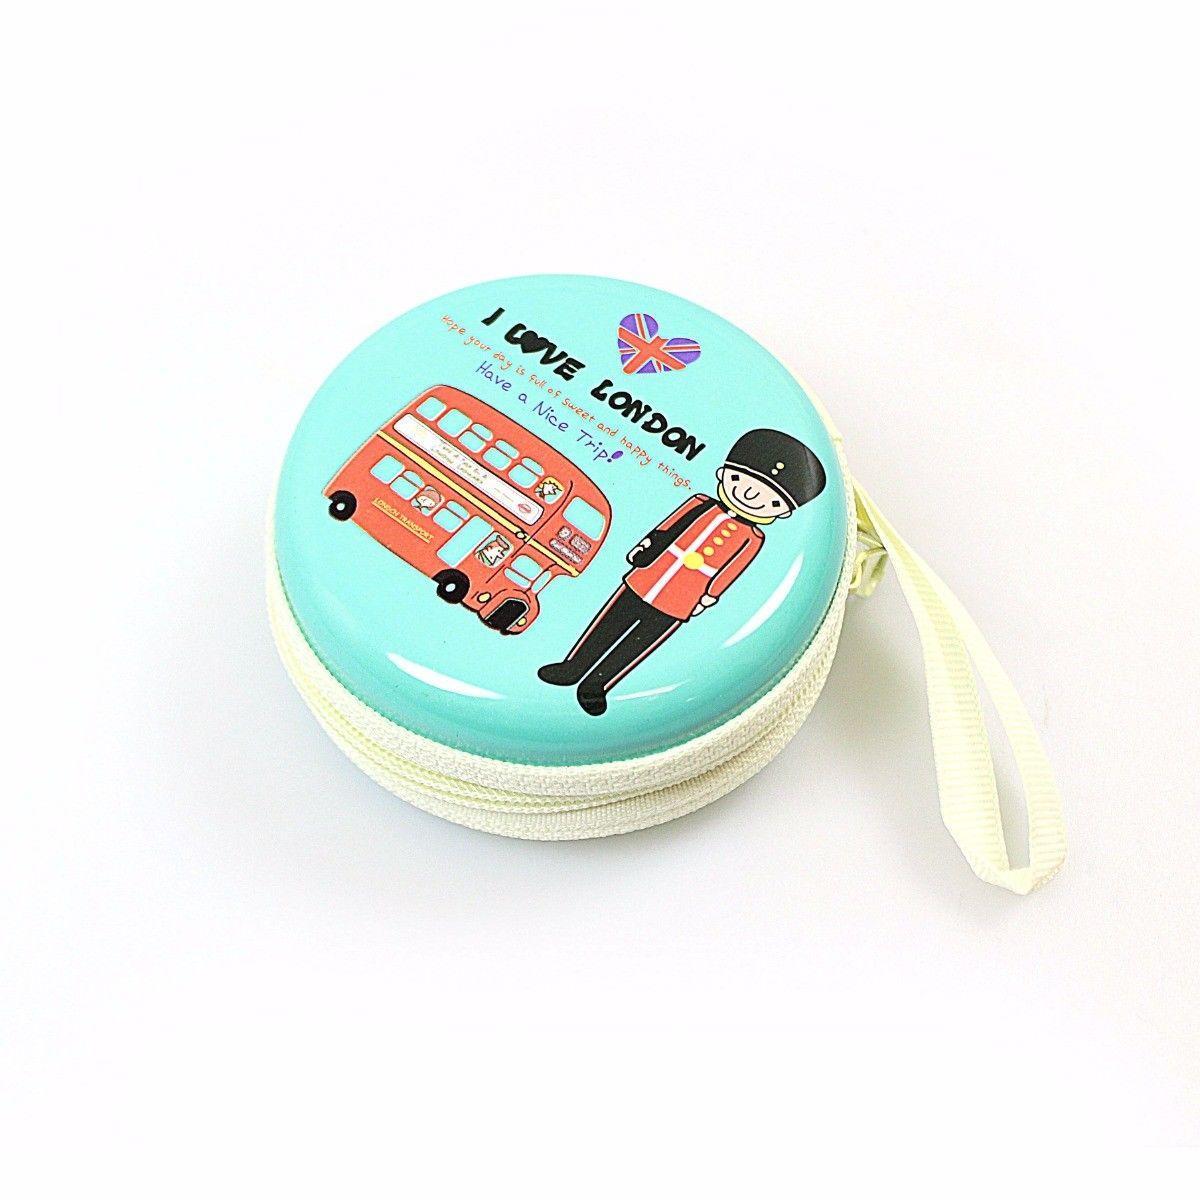 'I Love London' England Designs Earphone / Coin Pouch Assorted Designs 4497 (Large Letter Rate)